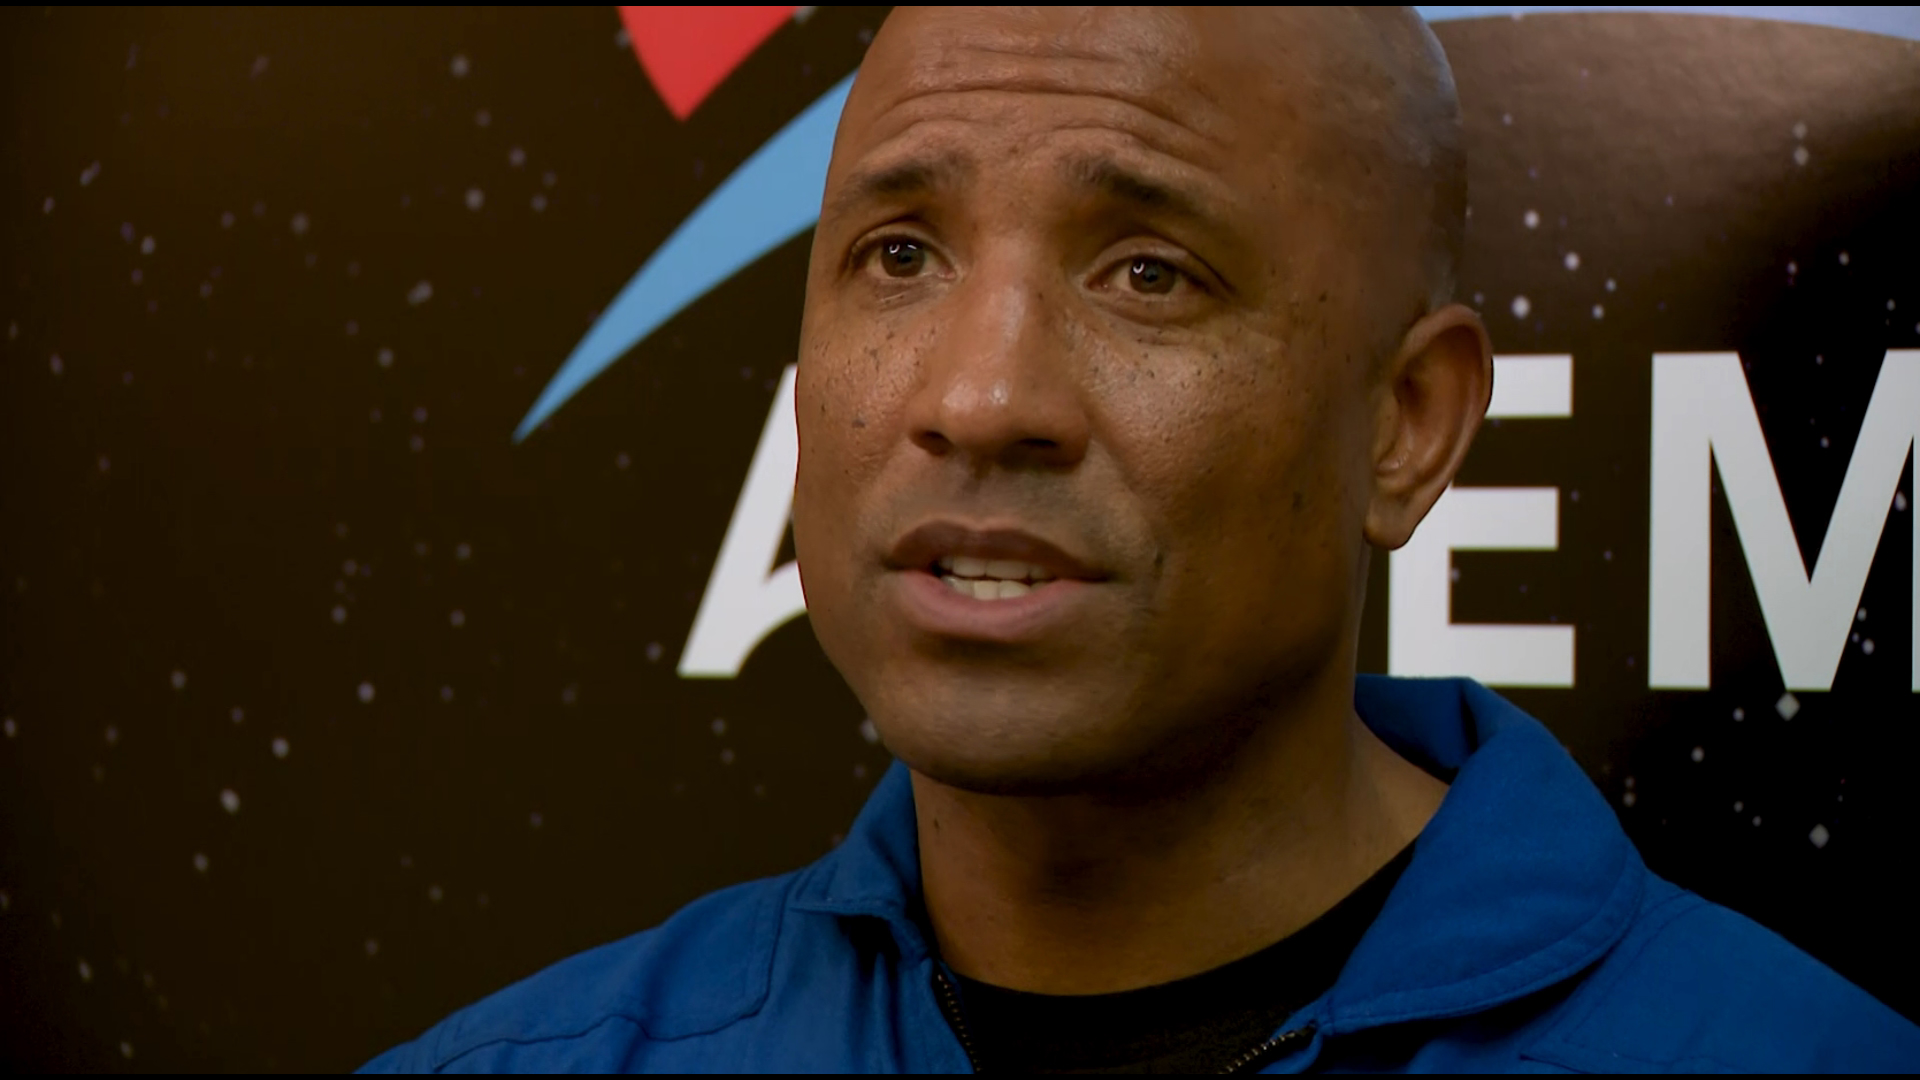 Victor Glover is the first African American assigned to a lunar mission.